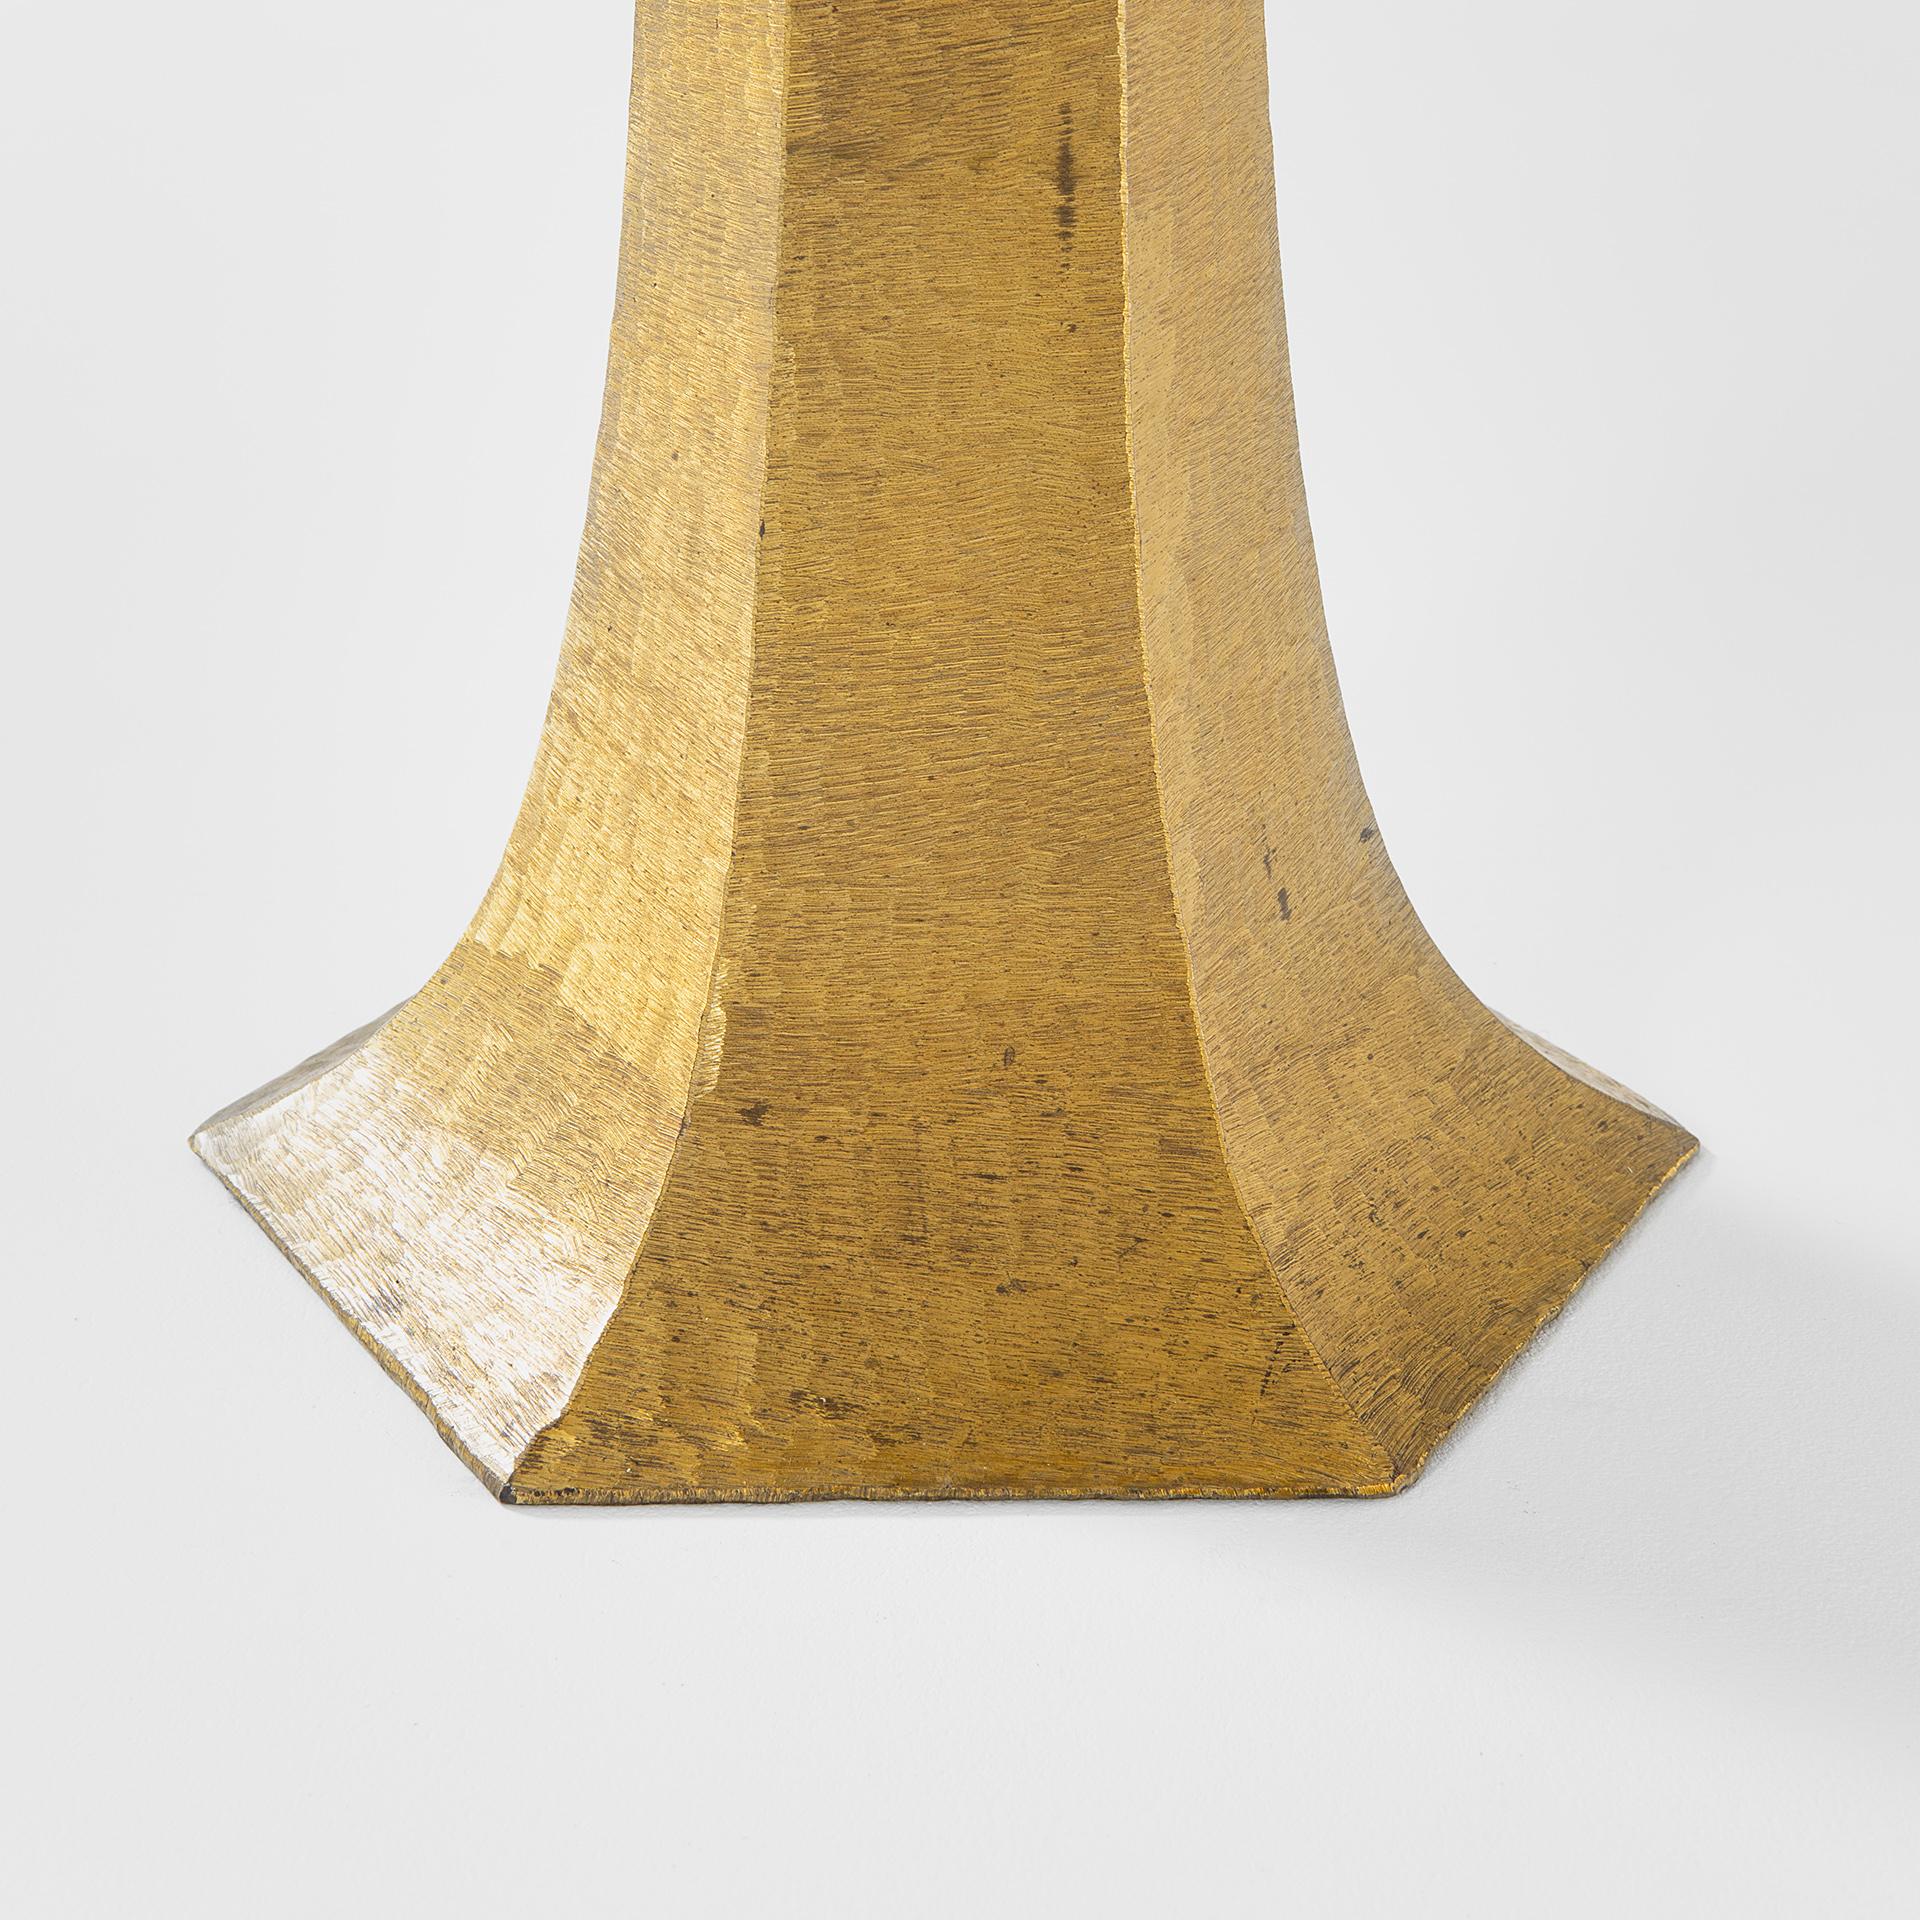 20th Century Big Table Lamp in Hammered Brass by Luciano Frigerio di Desio 70s In Good Condition For Sale In Turin, Turin